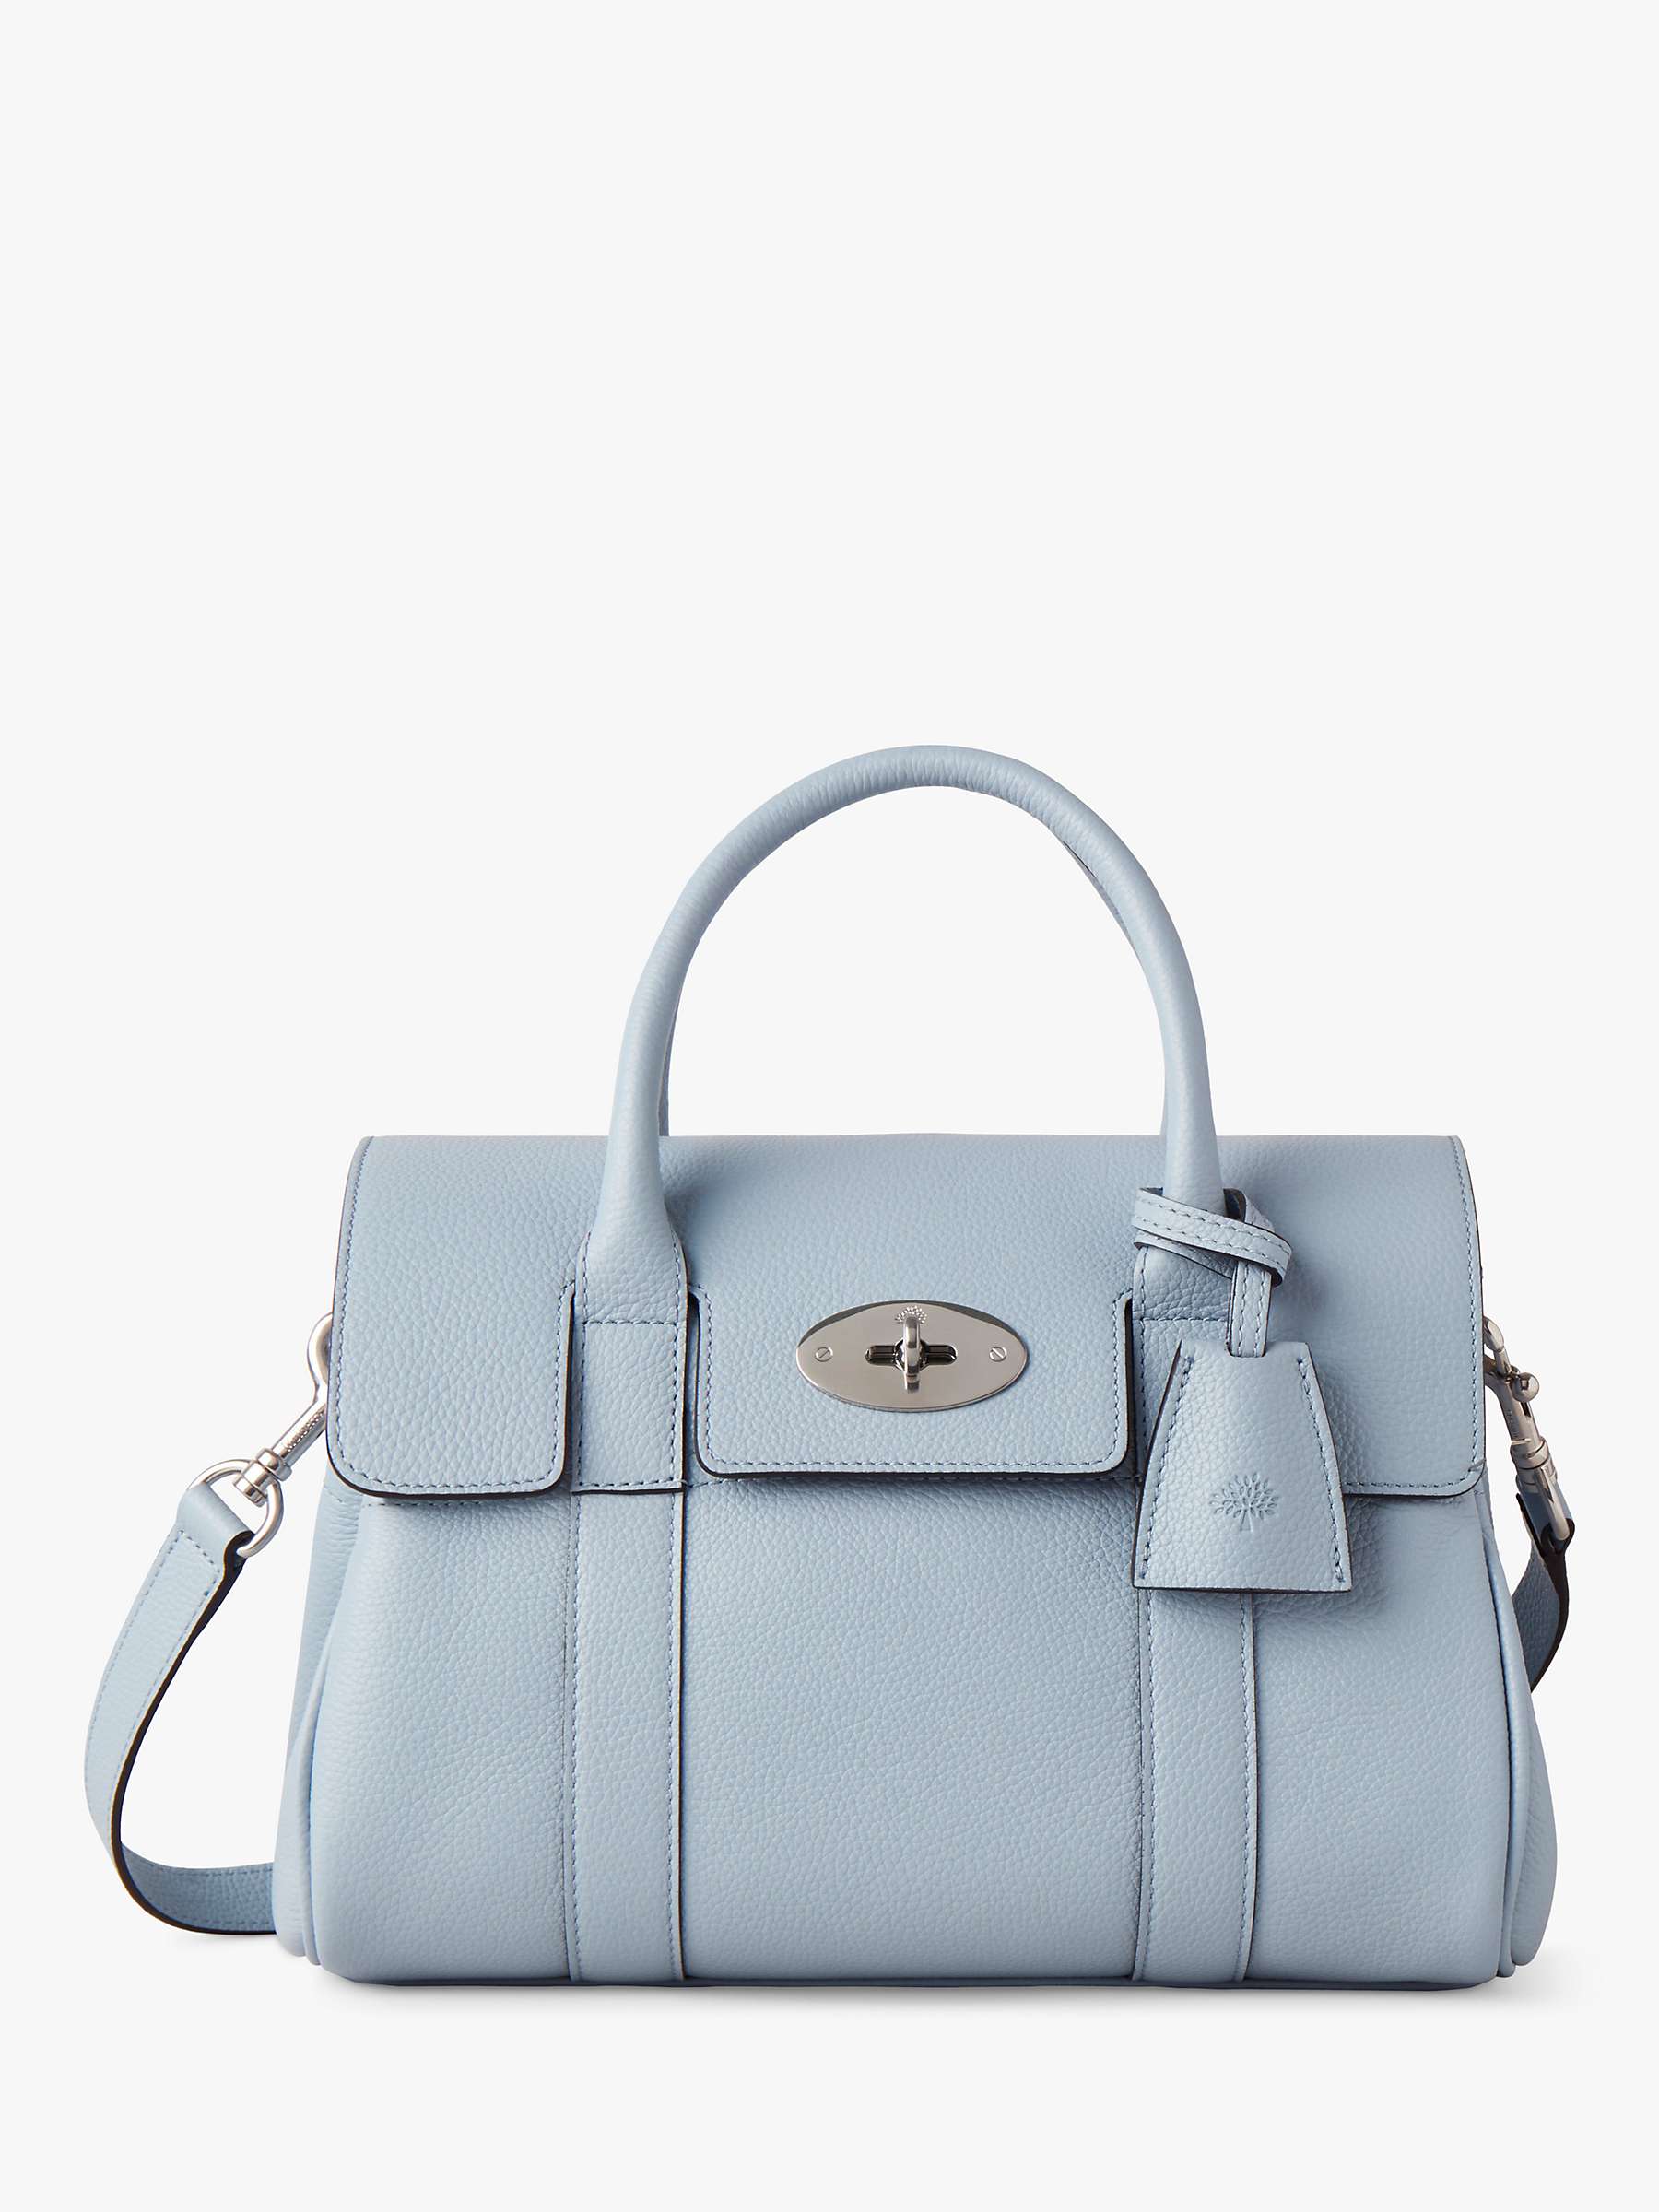 Buy Mulberry Bayswater Small Classic Grain Leather Satchel, Poplin Blue Online at johnlewis.com